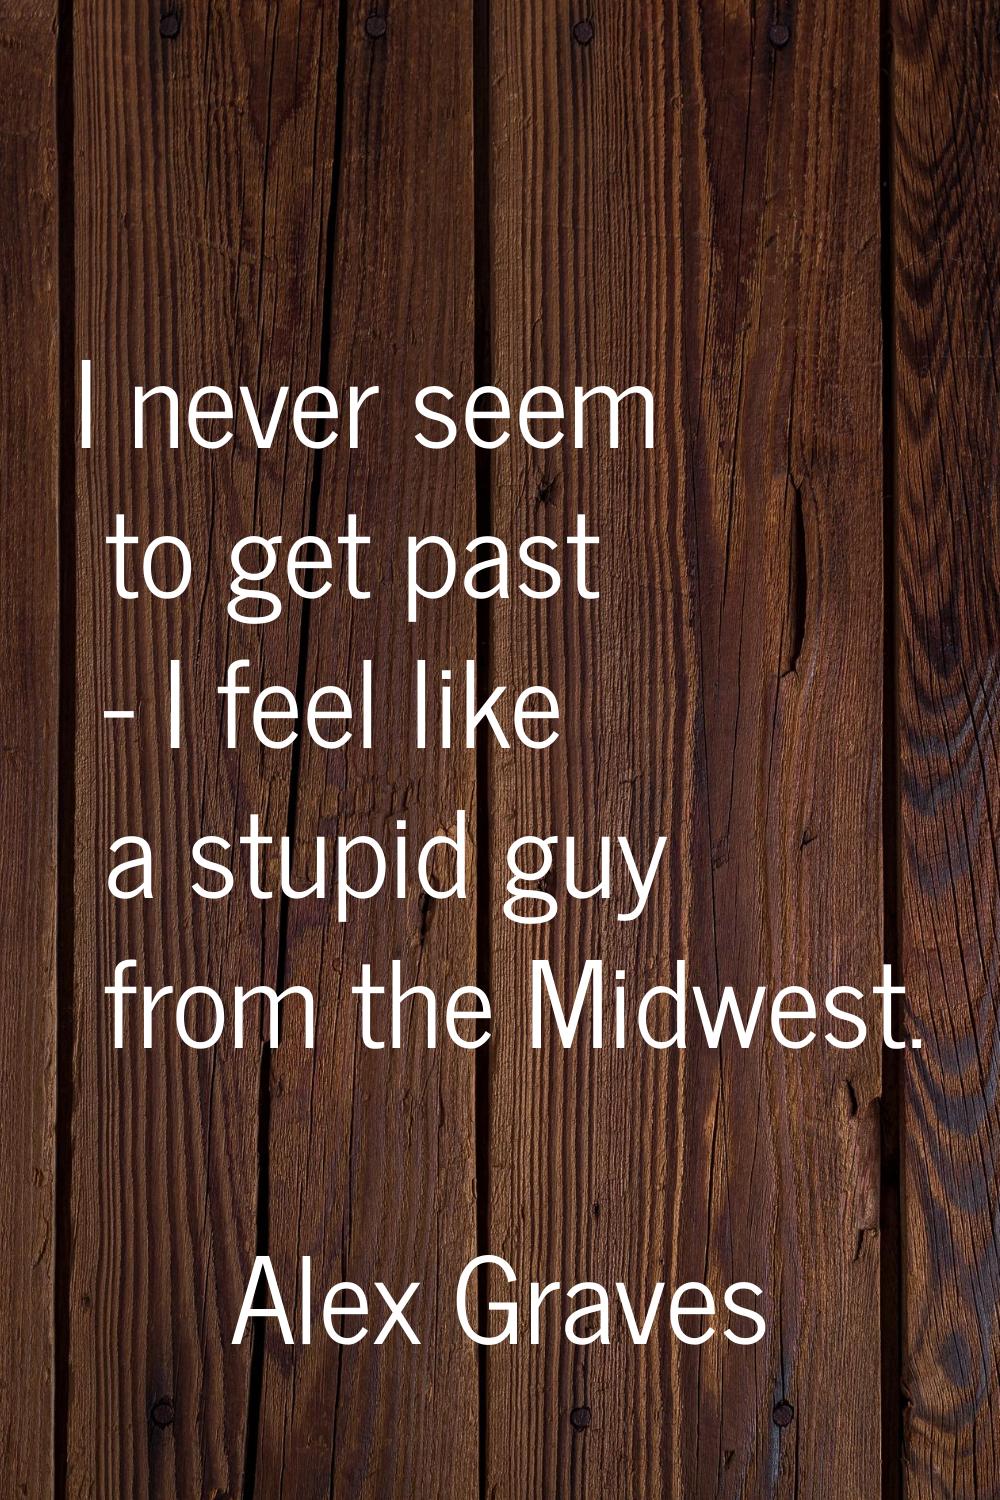 I never seem to get past - I feel like a stupid guy from the Midwest.